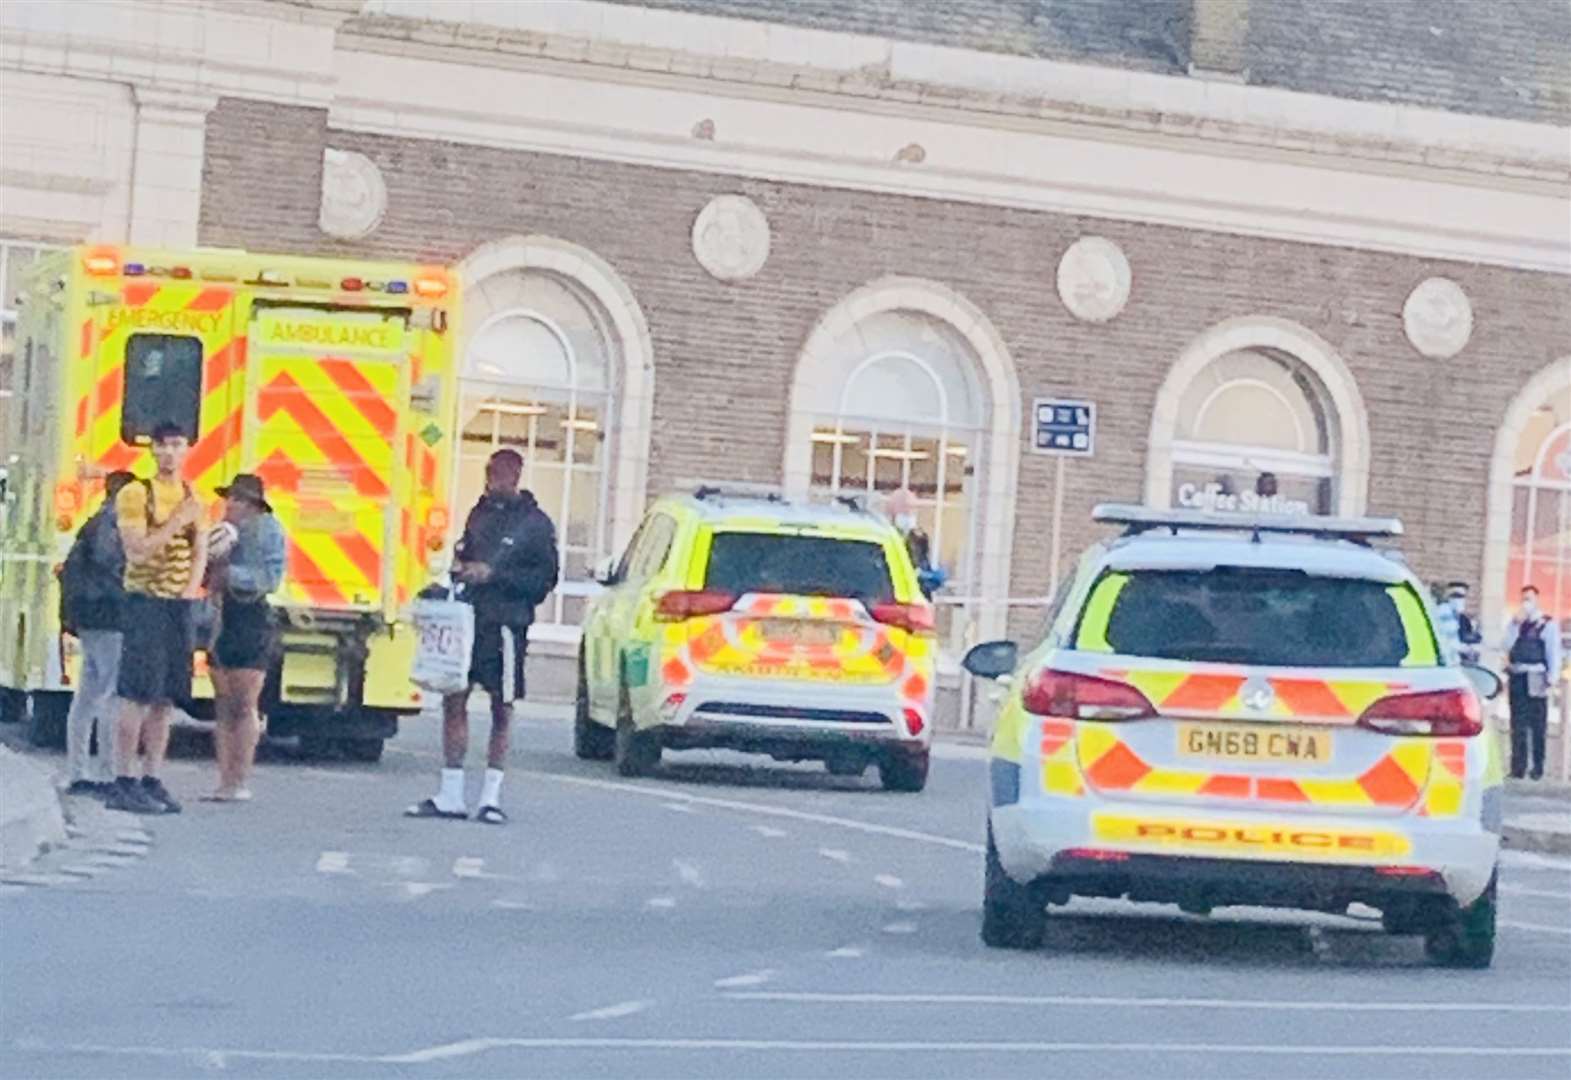 A man from Margate has been arrested following the attacks. Pictures: Rebecca Ann